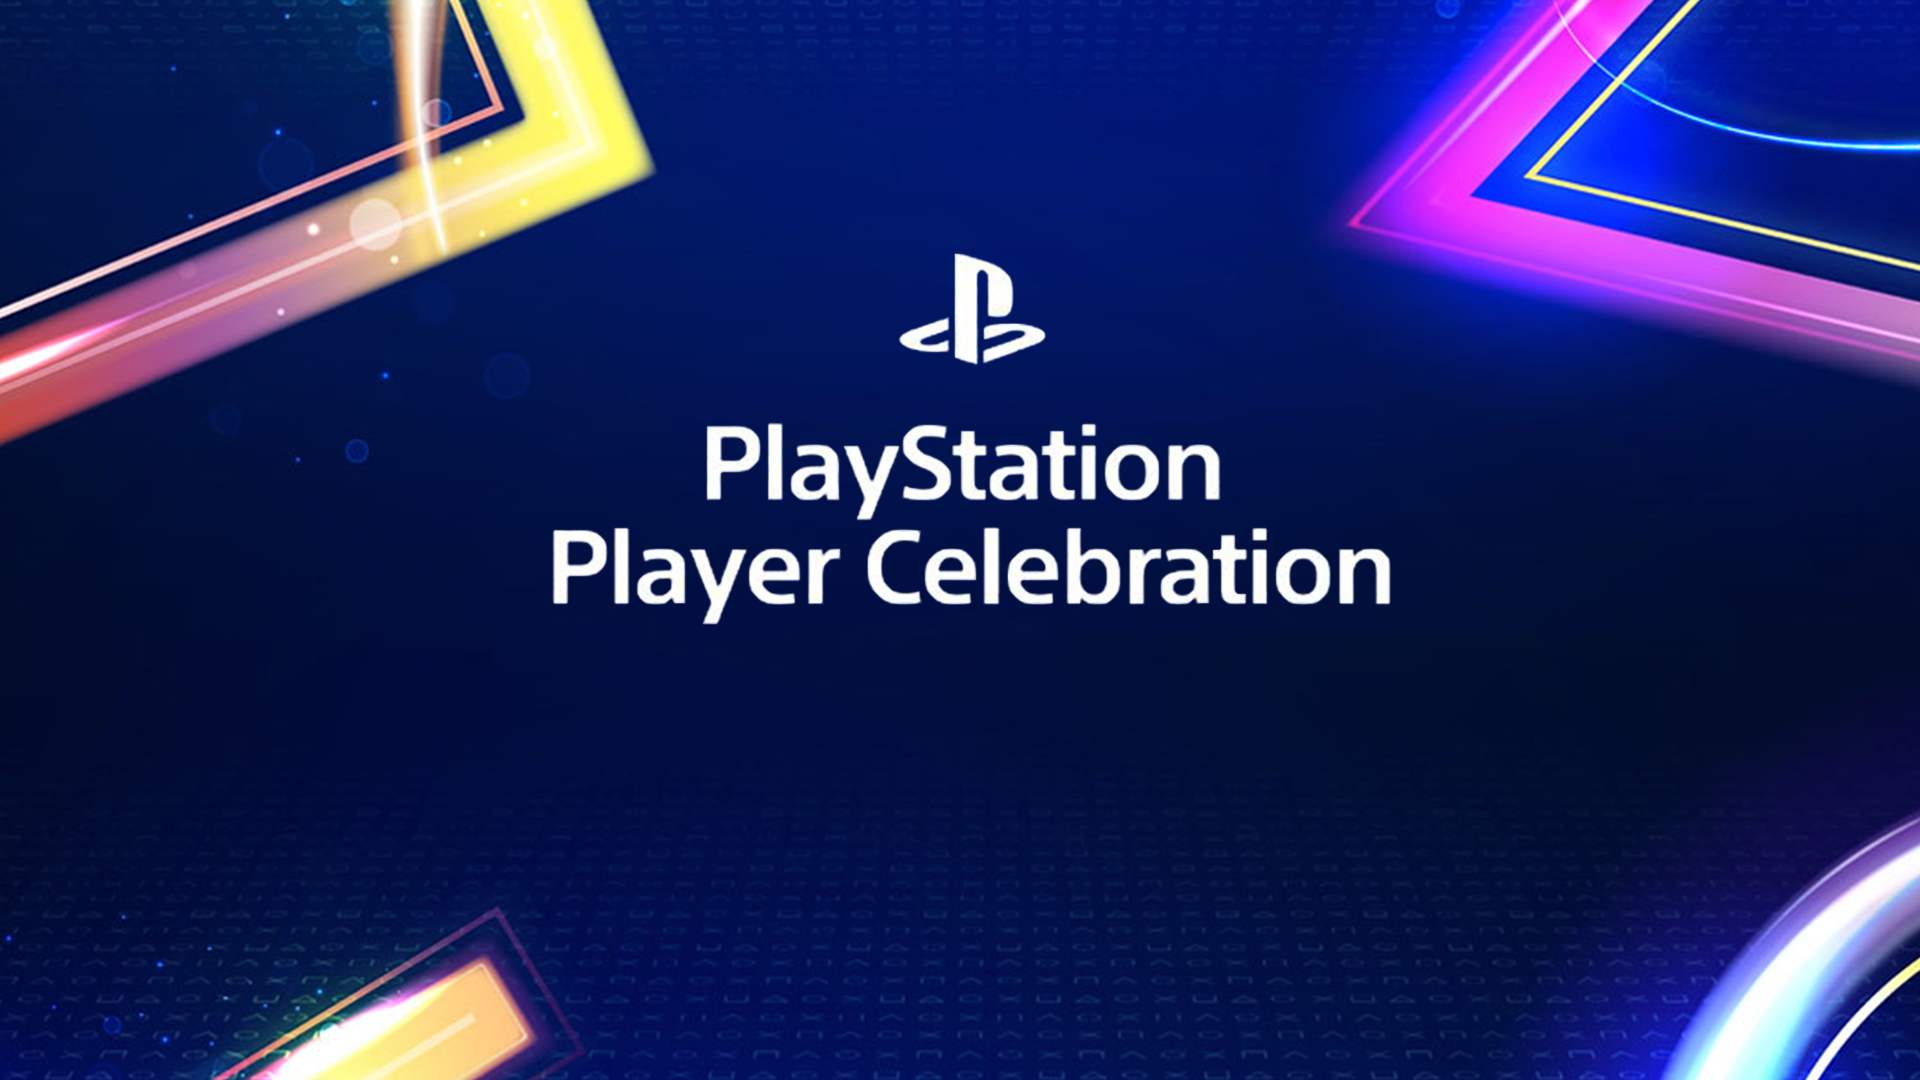 Game and win with PlayStation thanks their Player Celebration —